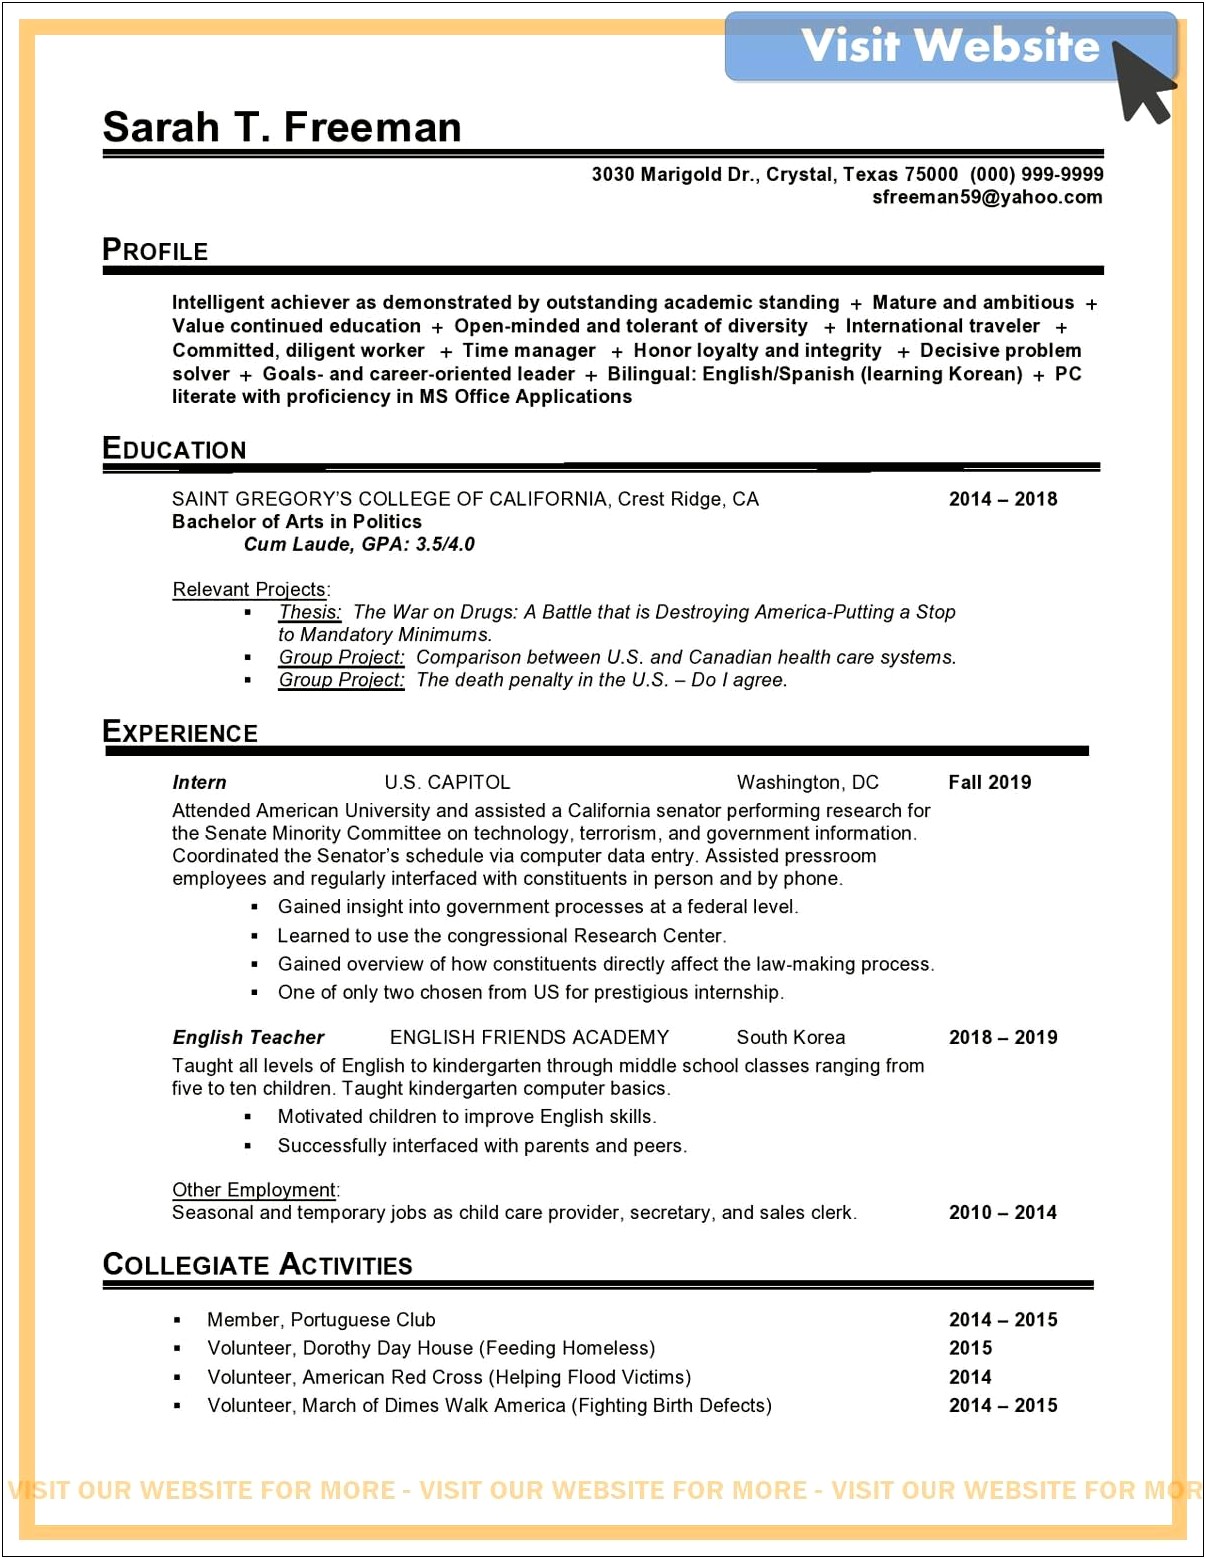 Resume Objective For It Analyst